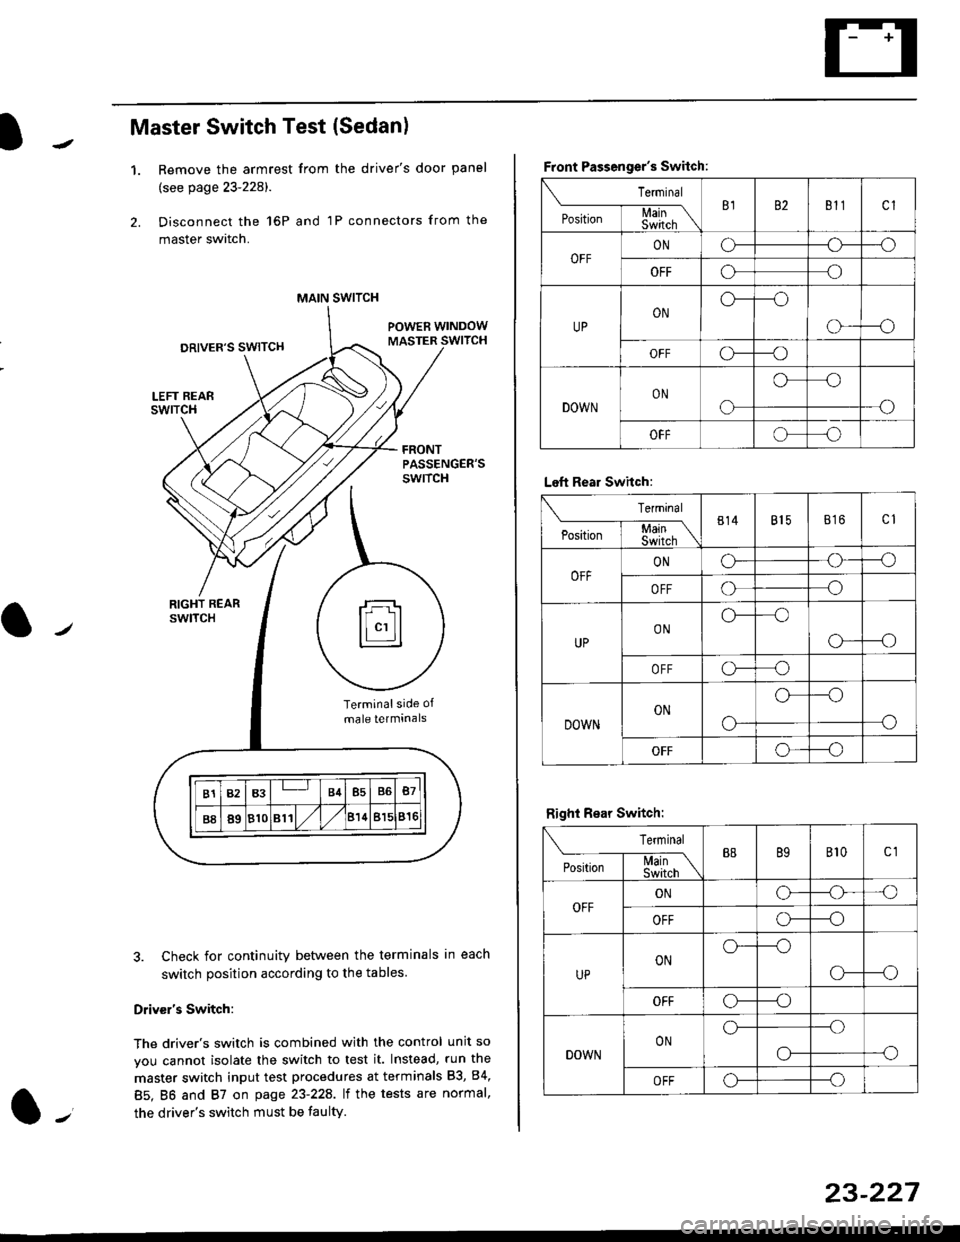 HONDA CIVIC 1999 6.G Workshop Manual Master Switch Test (Sedan)
1.Remove the armrest from the drivers door panel
(see page 23-228).
Disconnect the 16P and 1P connectors from the
master switch.
Check for continuity between the terminals 